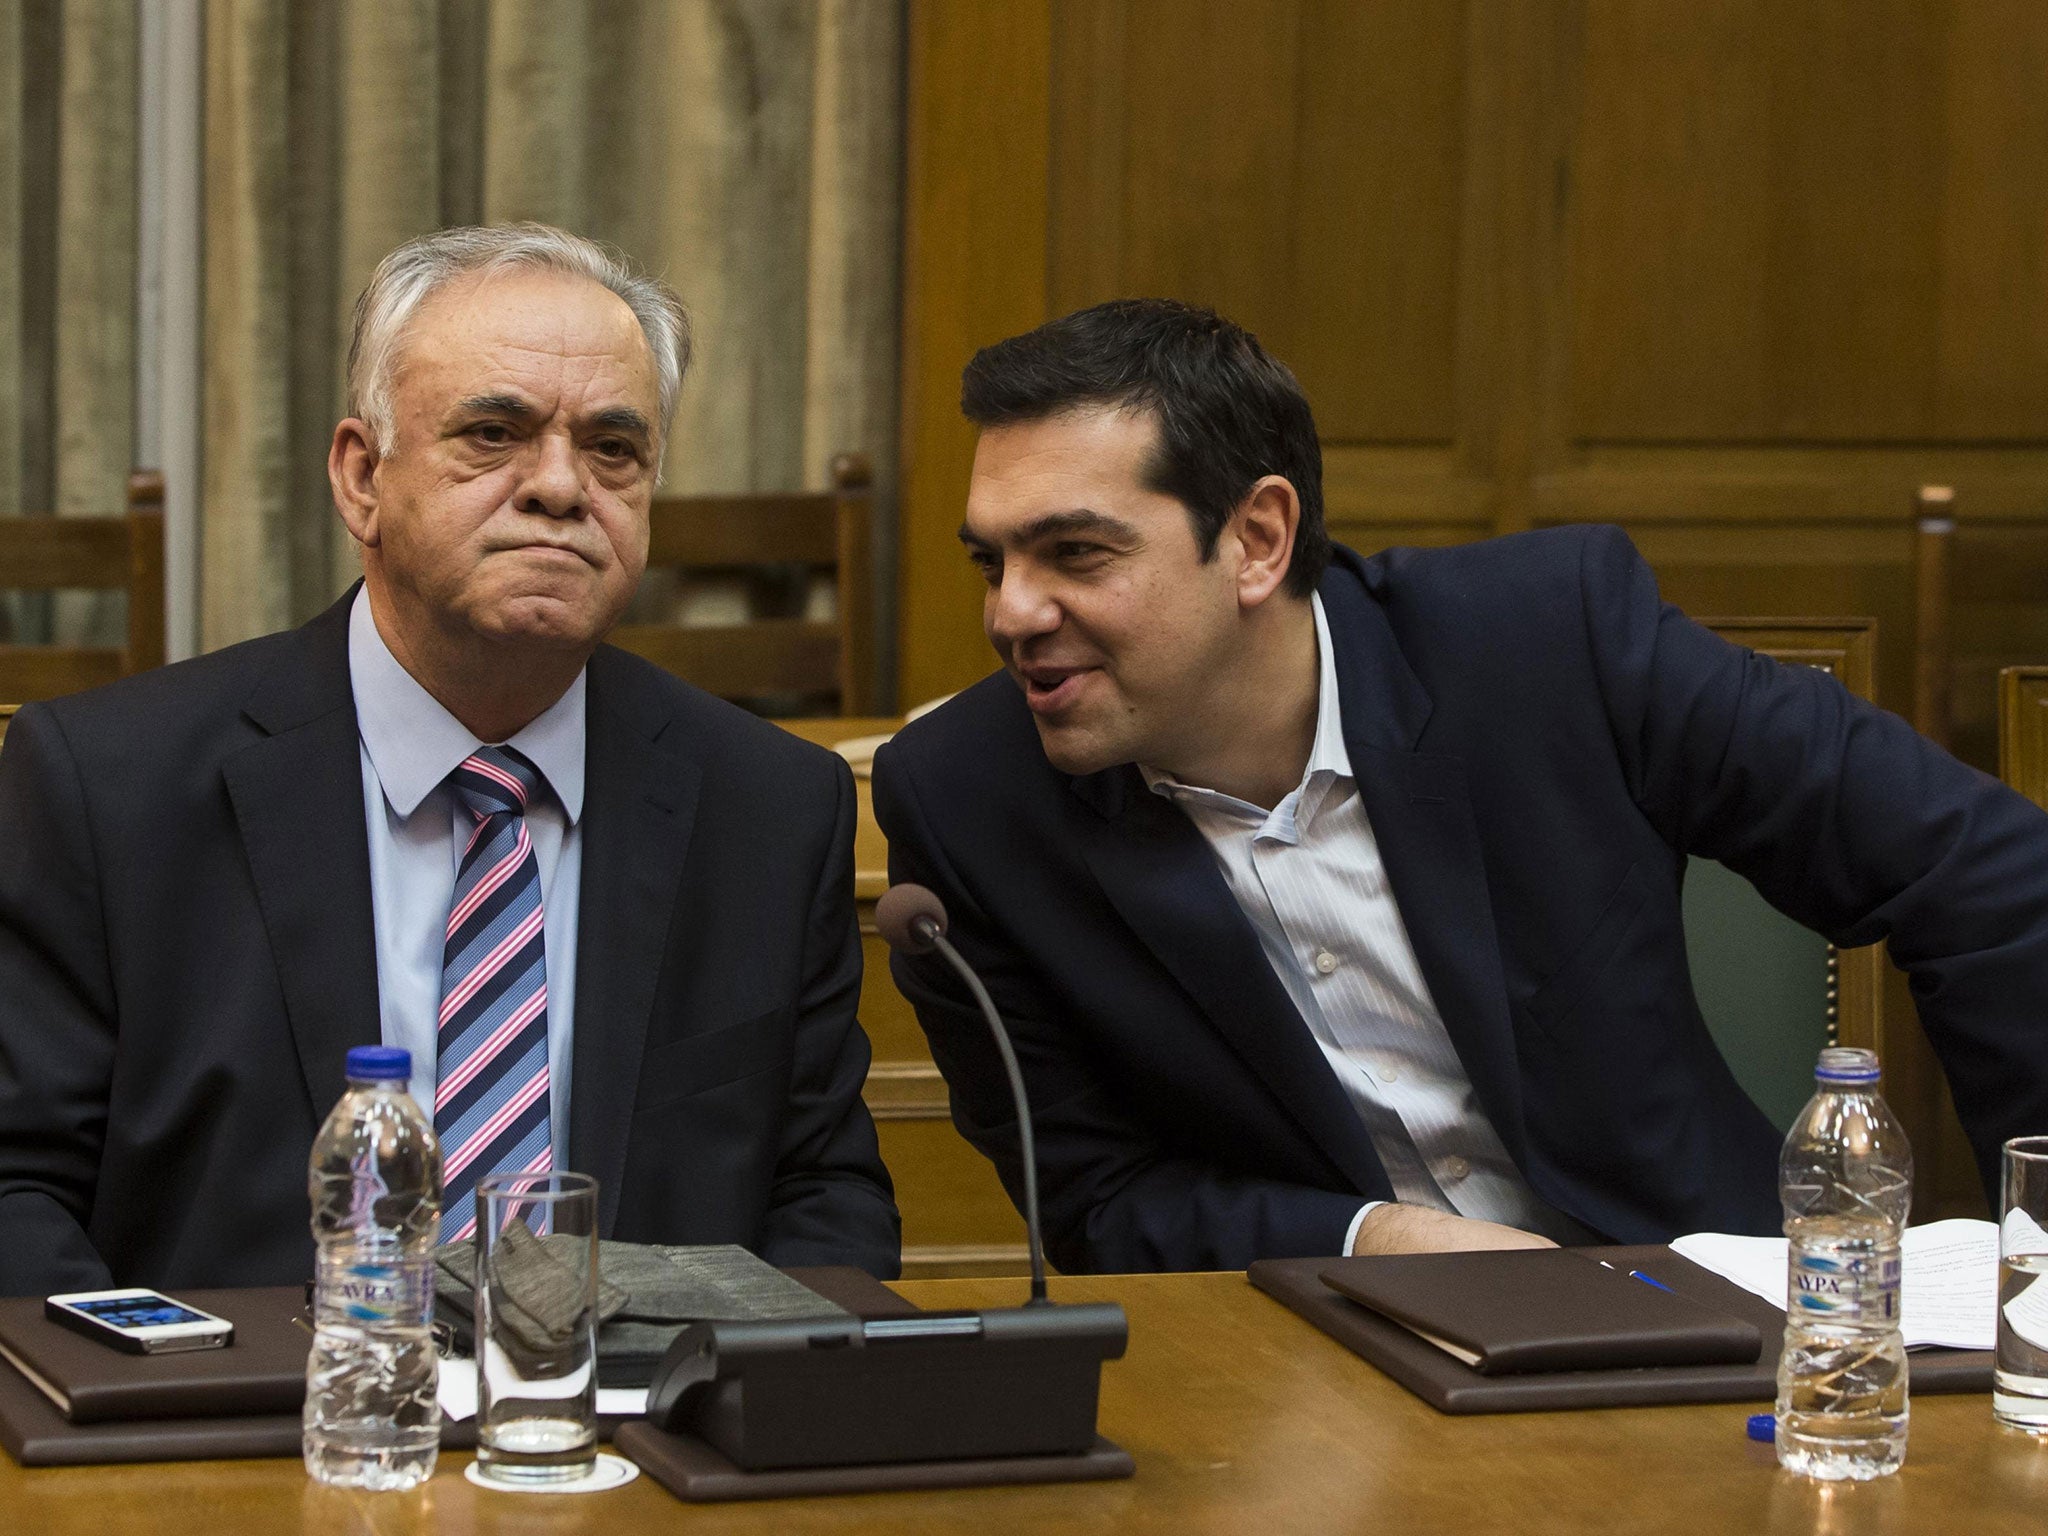 Greek Prime Minister Alexis Tsipras (right) talks to Deputy Prime Minister Yannis Dragasakis during the first meeting of new cabinet post elections in the parliament building in Athens January 28, 2015